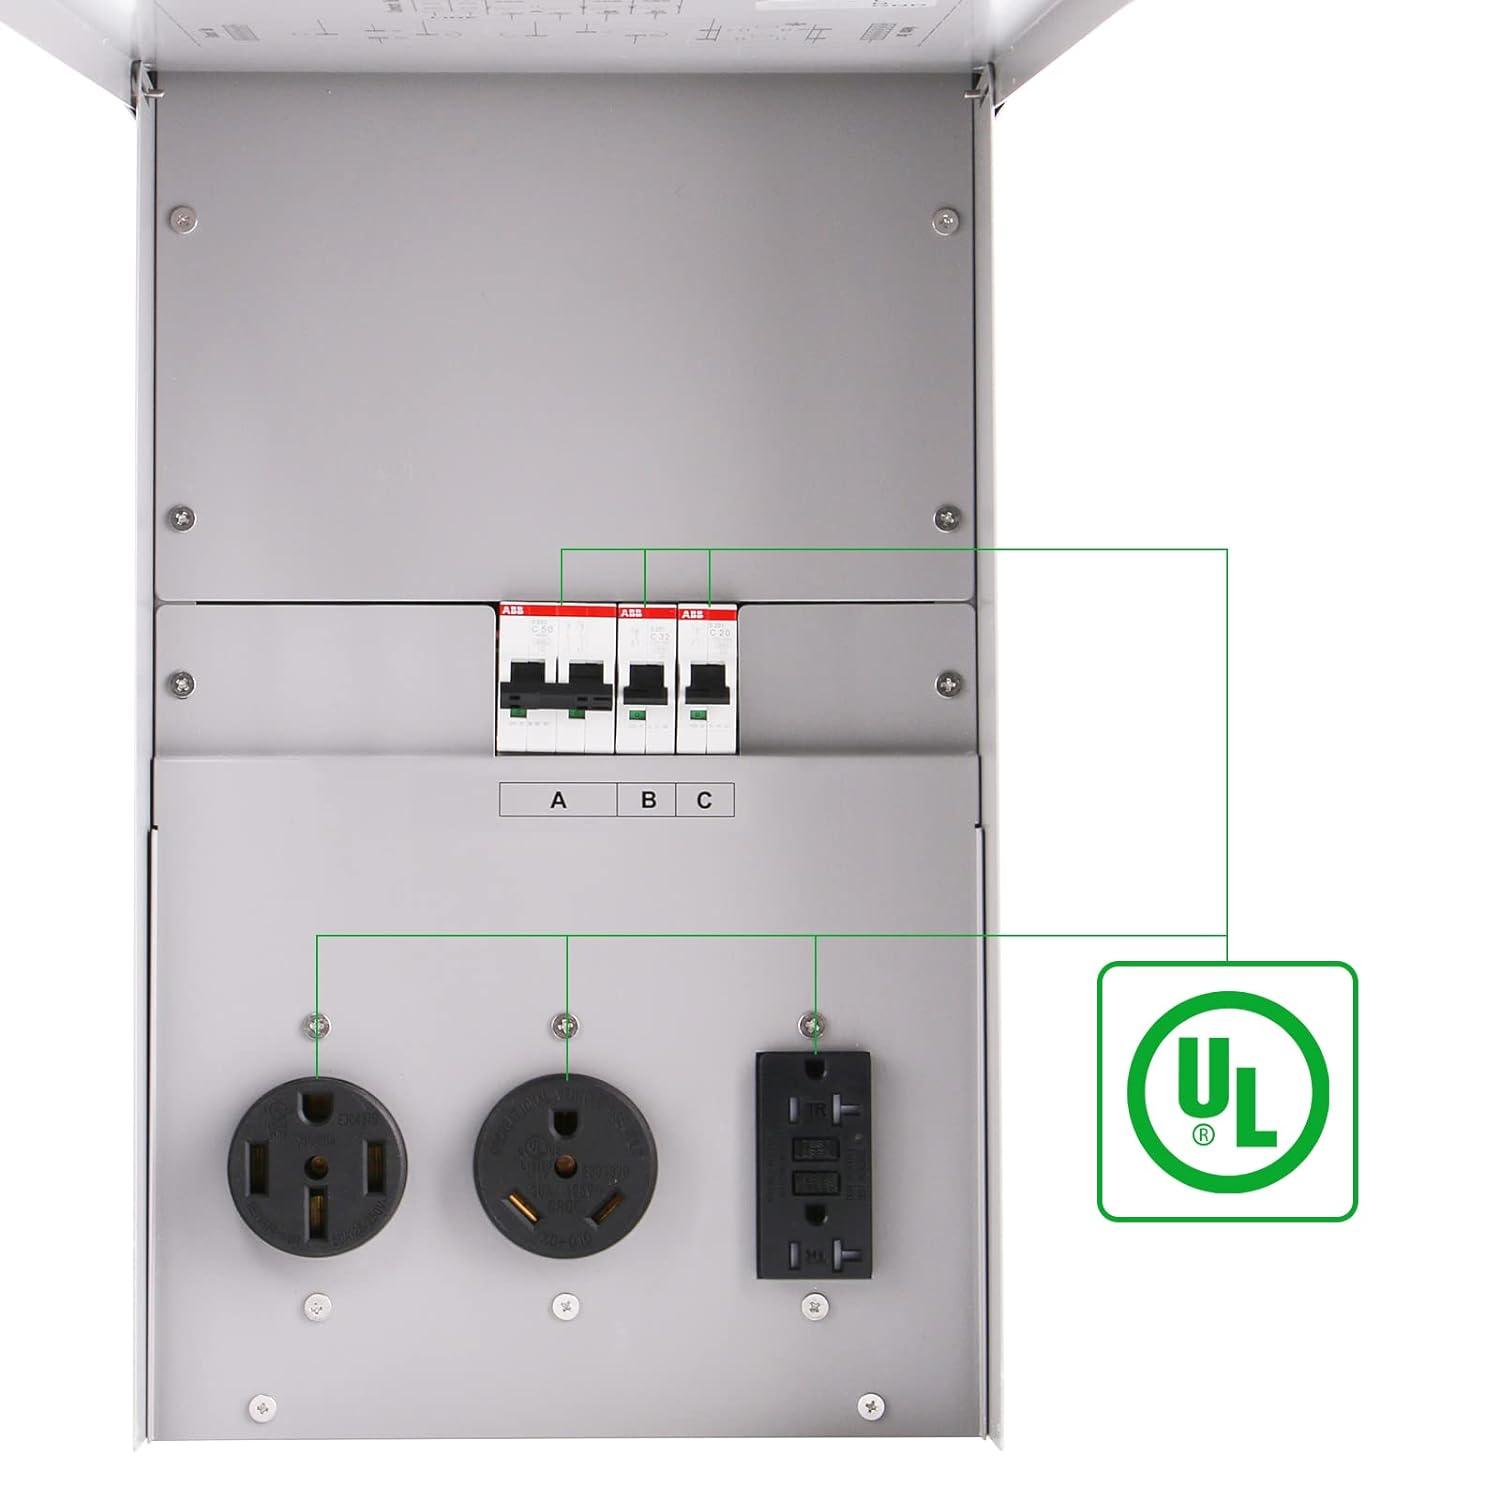 Temporary Power Outlet Panel, Briidea RV Panel Outlet with a 20, 30, 50 Amp Receptacle Installed, Prewired, Weatherproof - briidea